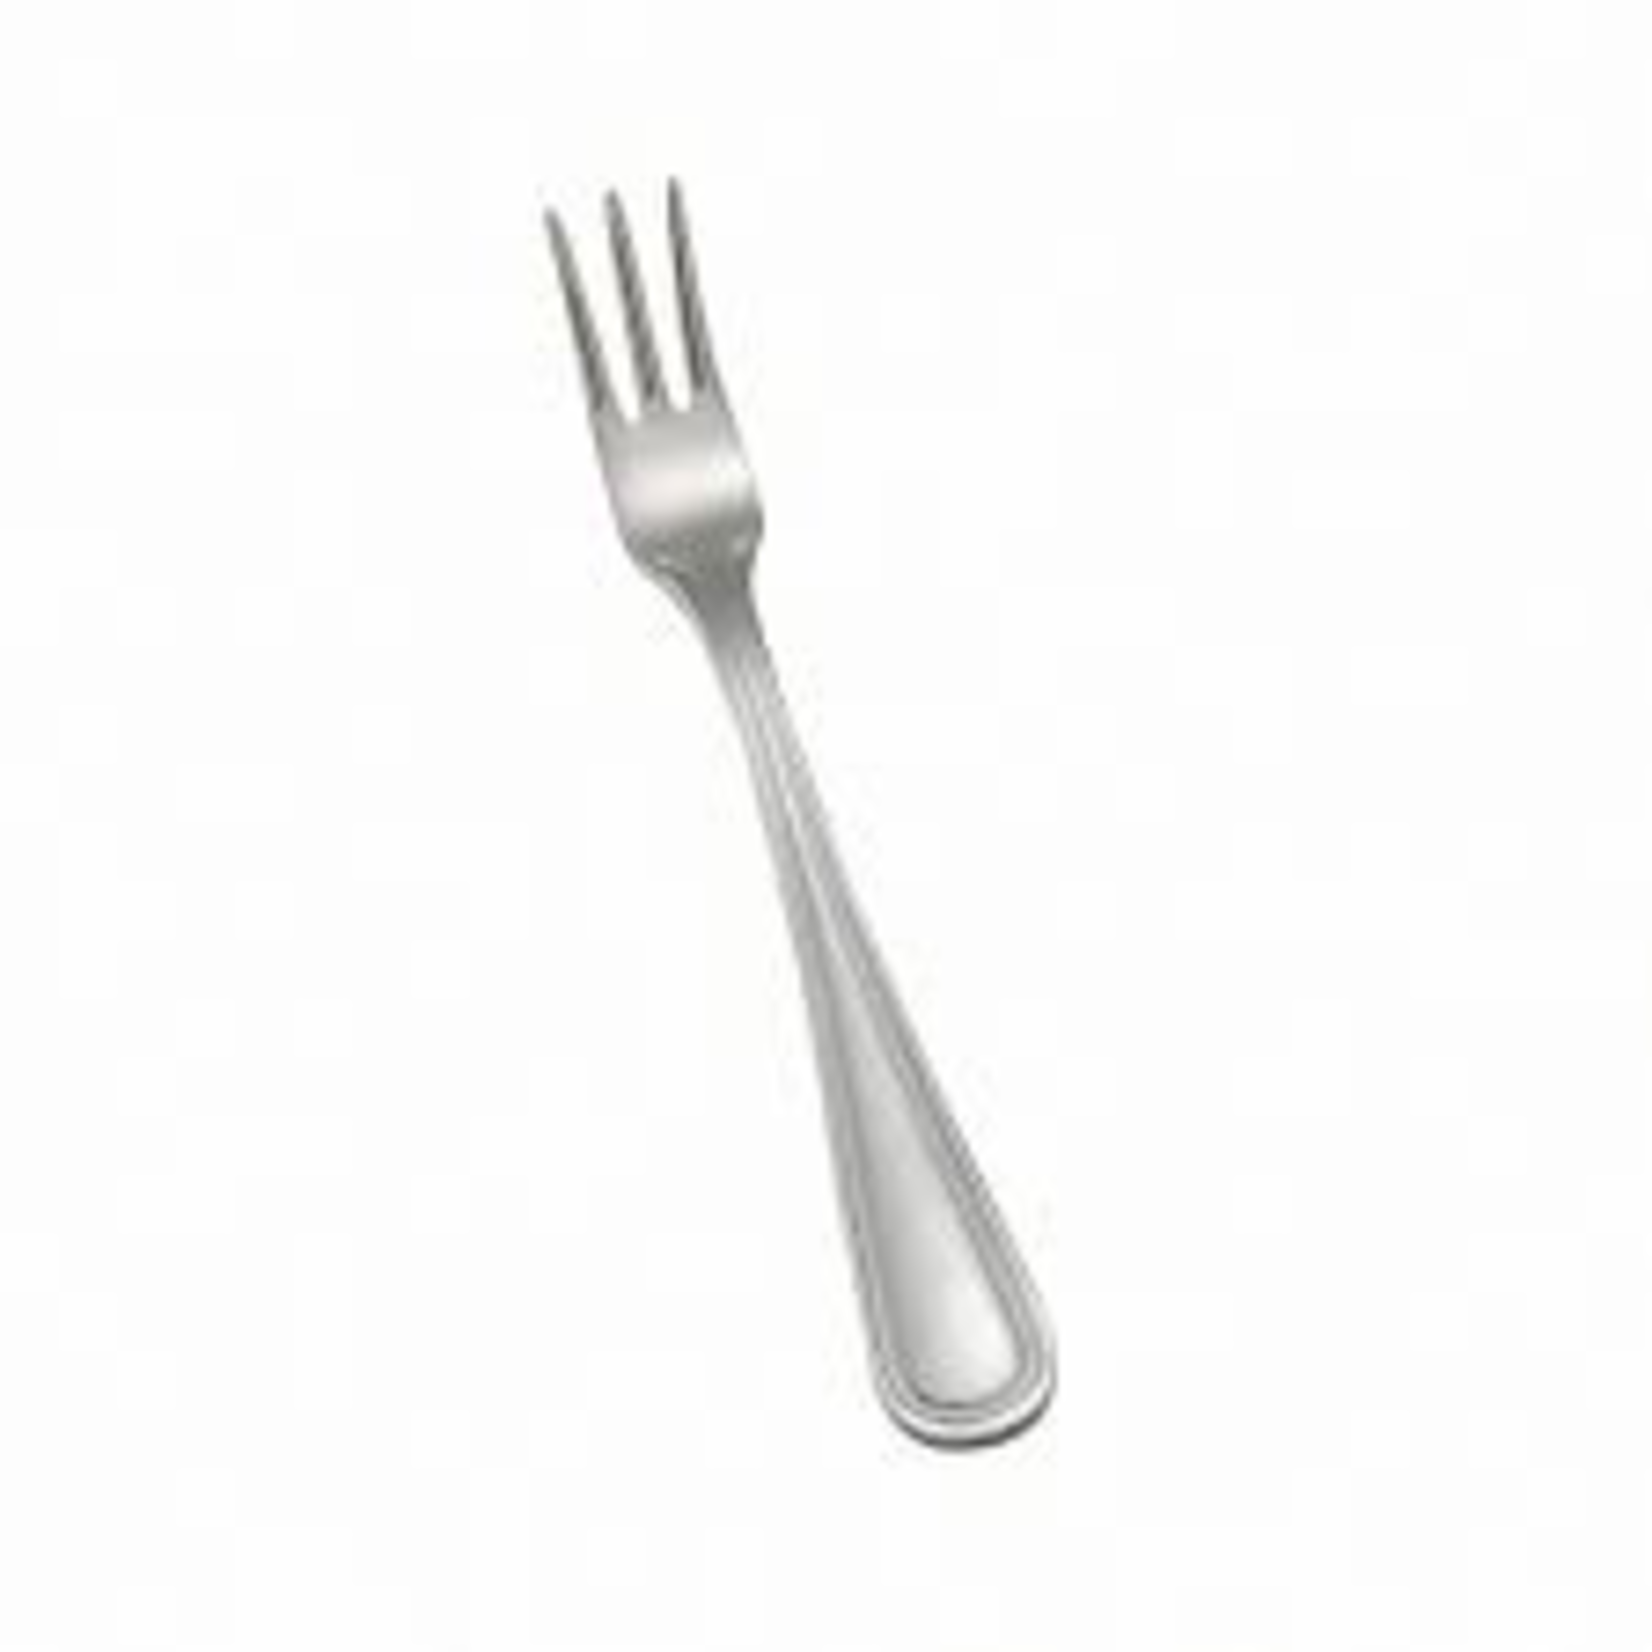 D.W.L. INDUSTRIES 0030-07 Winco Shangarila Oyster Fork 18/8 12/ box